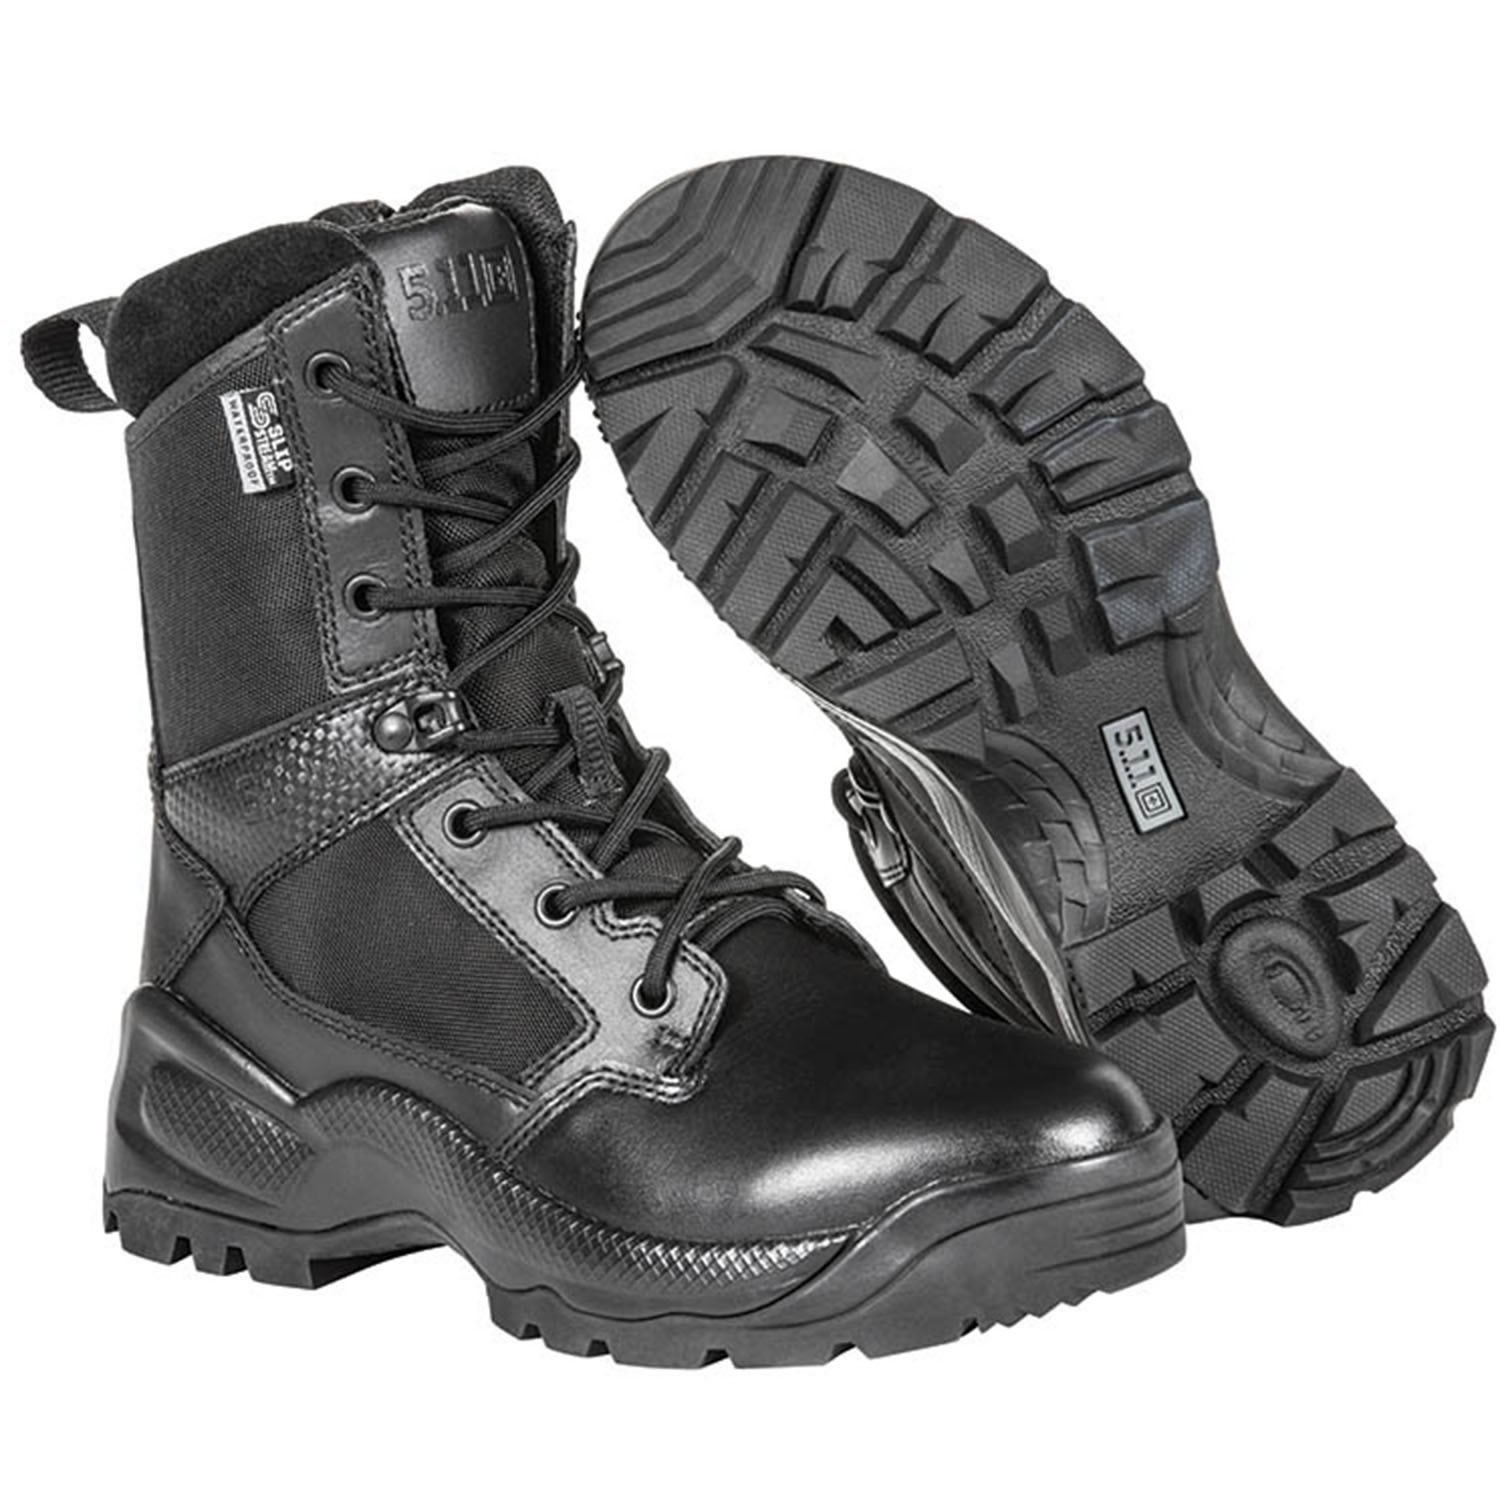 ATAC Storm 8 Inch Boot | 5.11